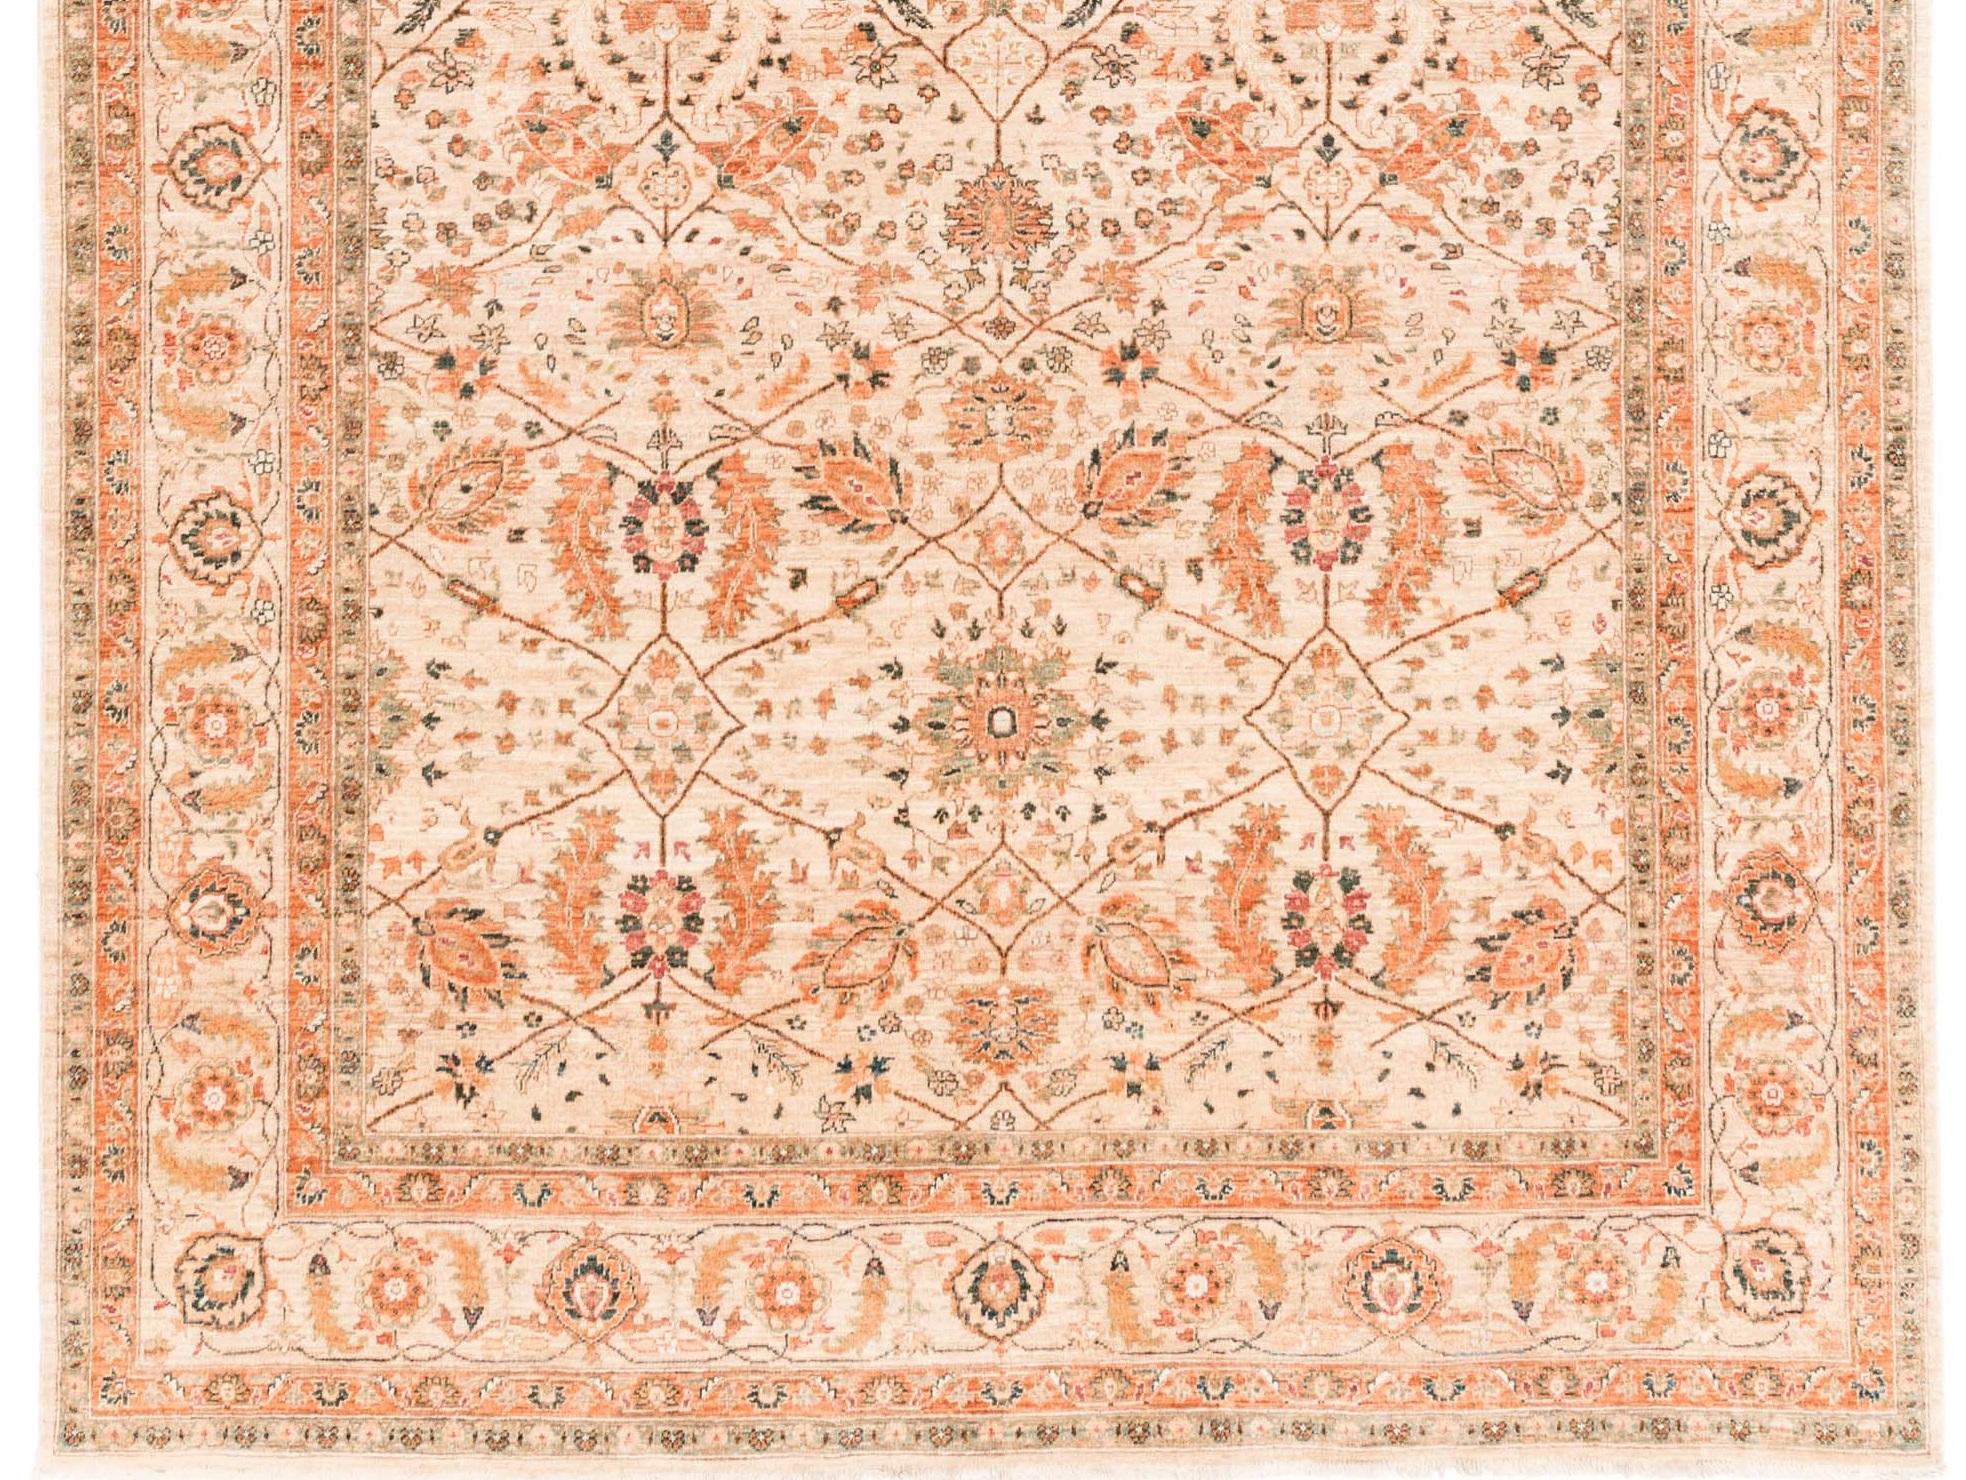 Contemporary Afghan Transitional Rug Handwoven with Ivory, Orange, Green Wool